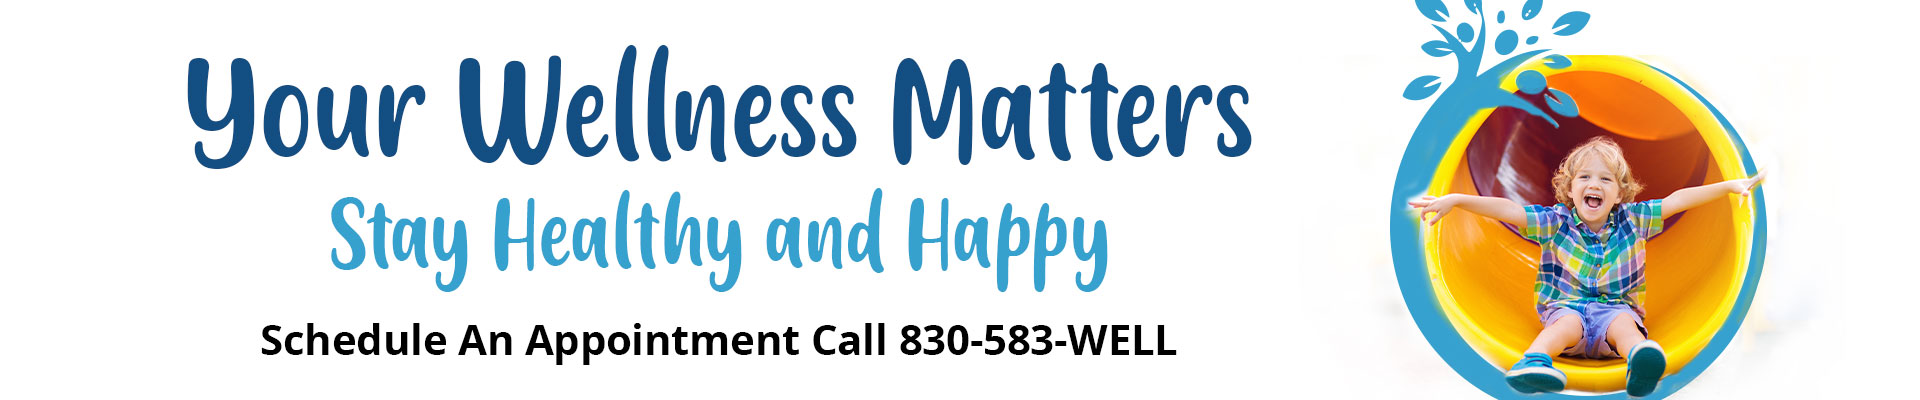 Your Wellness Matters
Stay Healthy and Happy

Schedule an appointment call 830-583-well